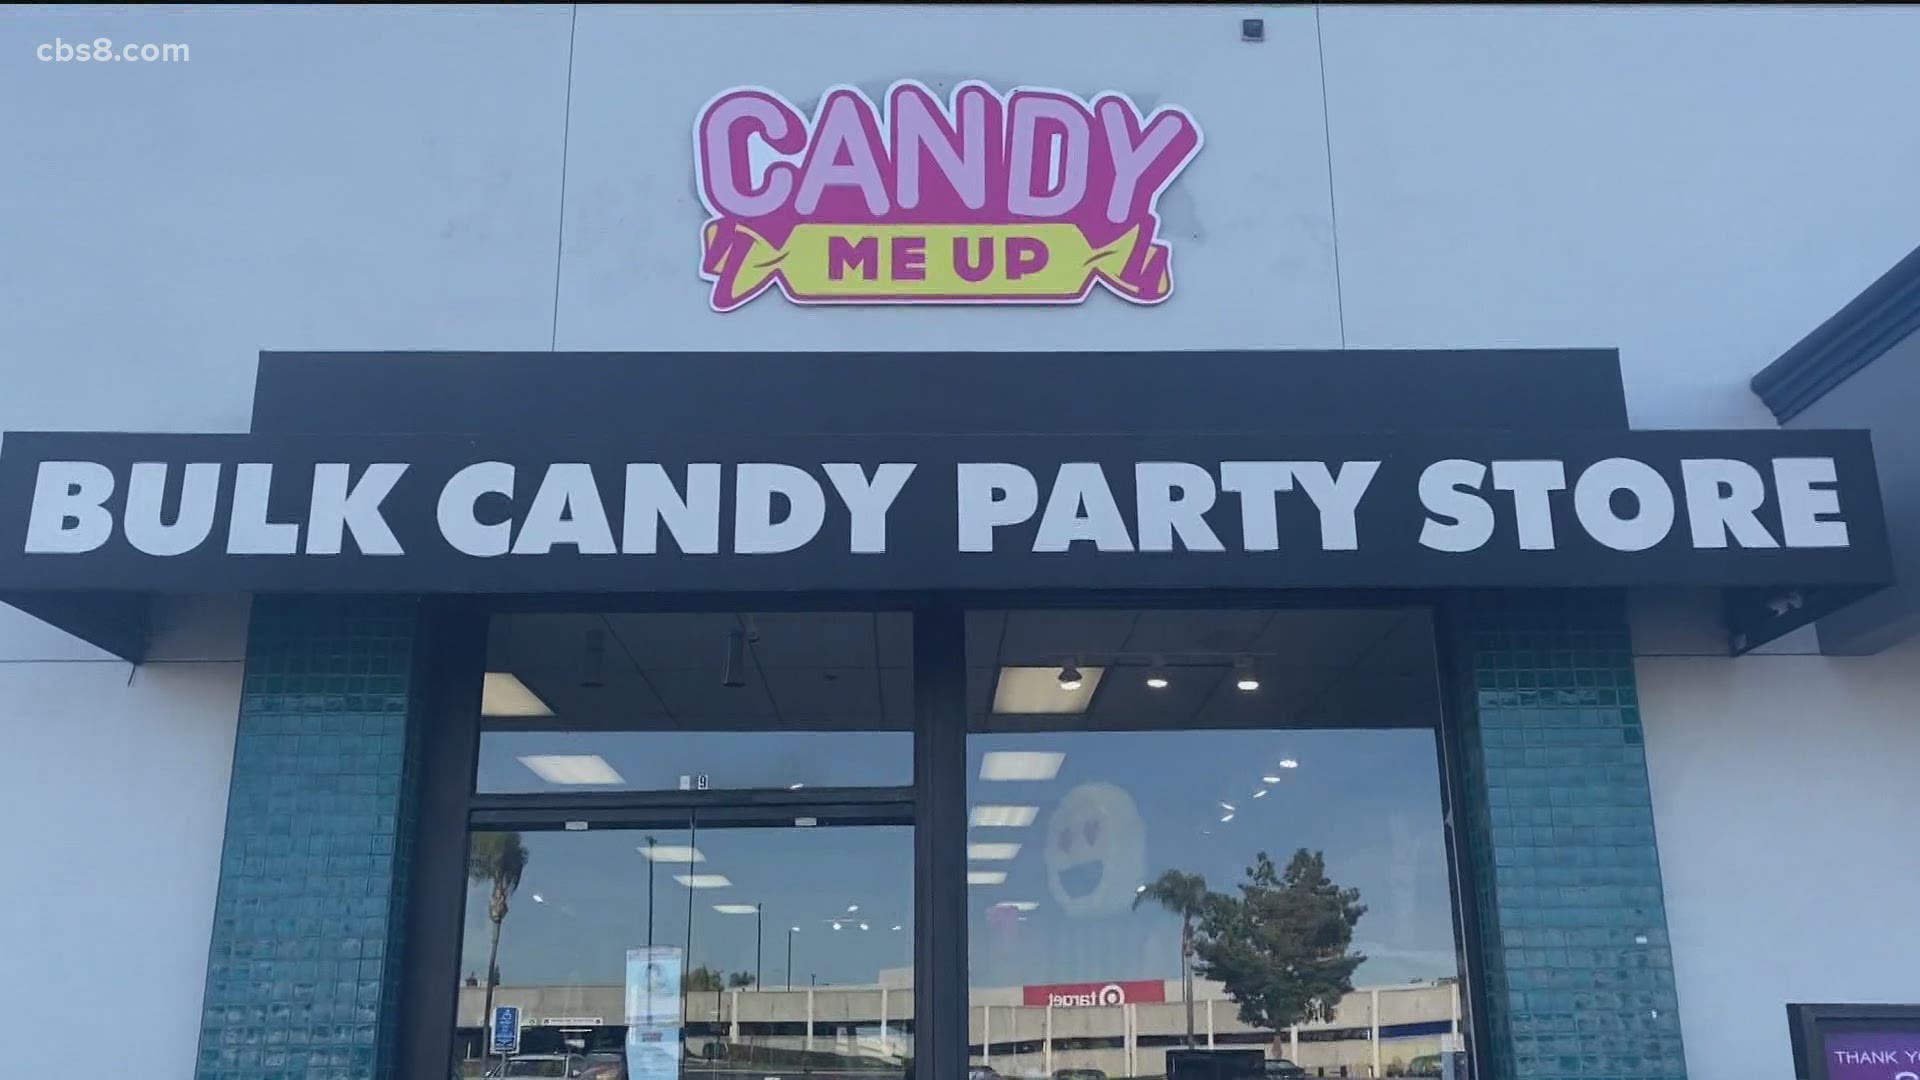 "Candy always brings back certain memories." A candy store in Grossmont Center sells all types of candies in bulk.